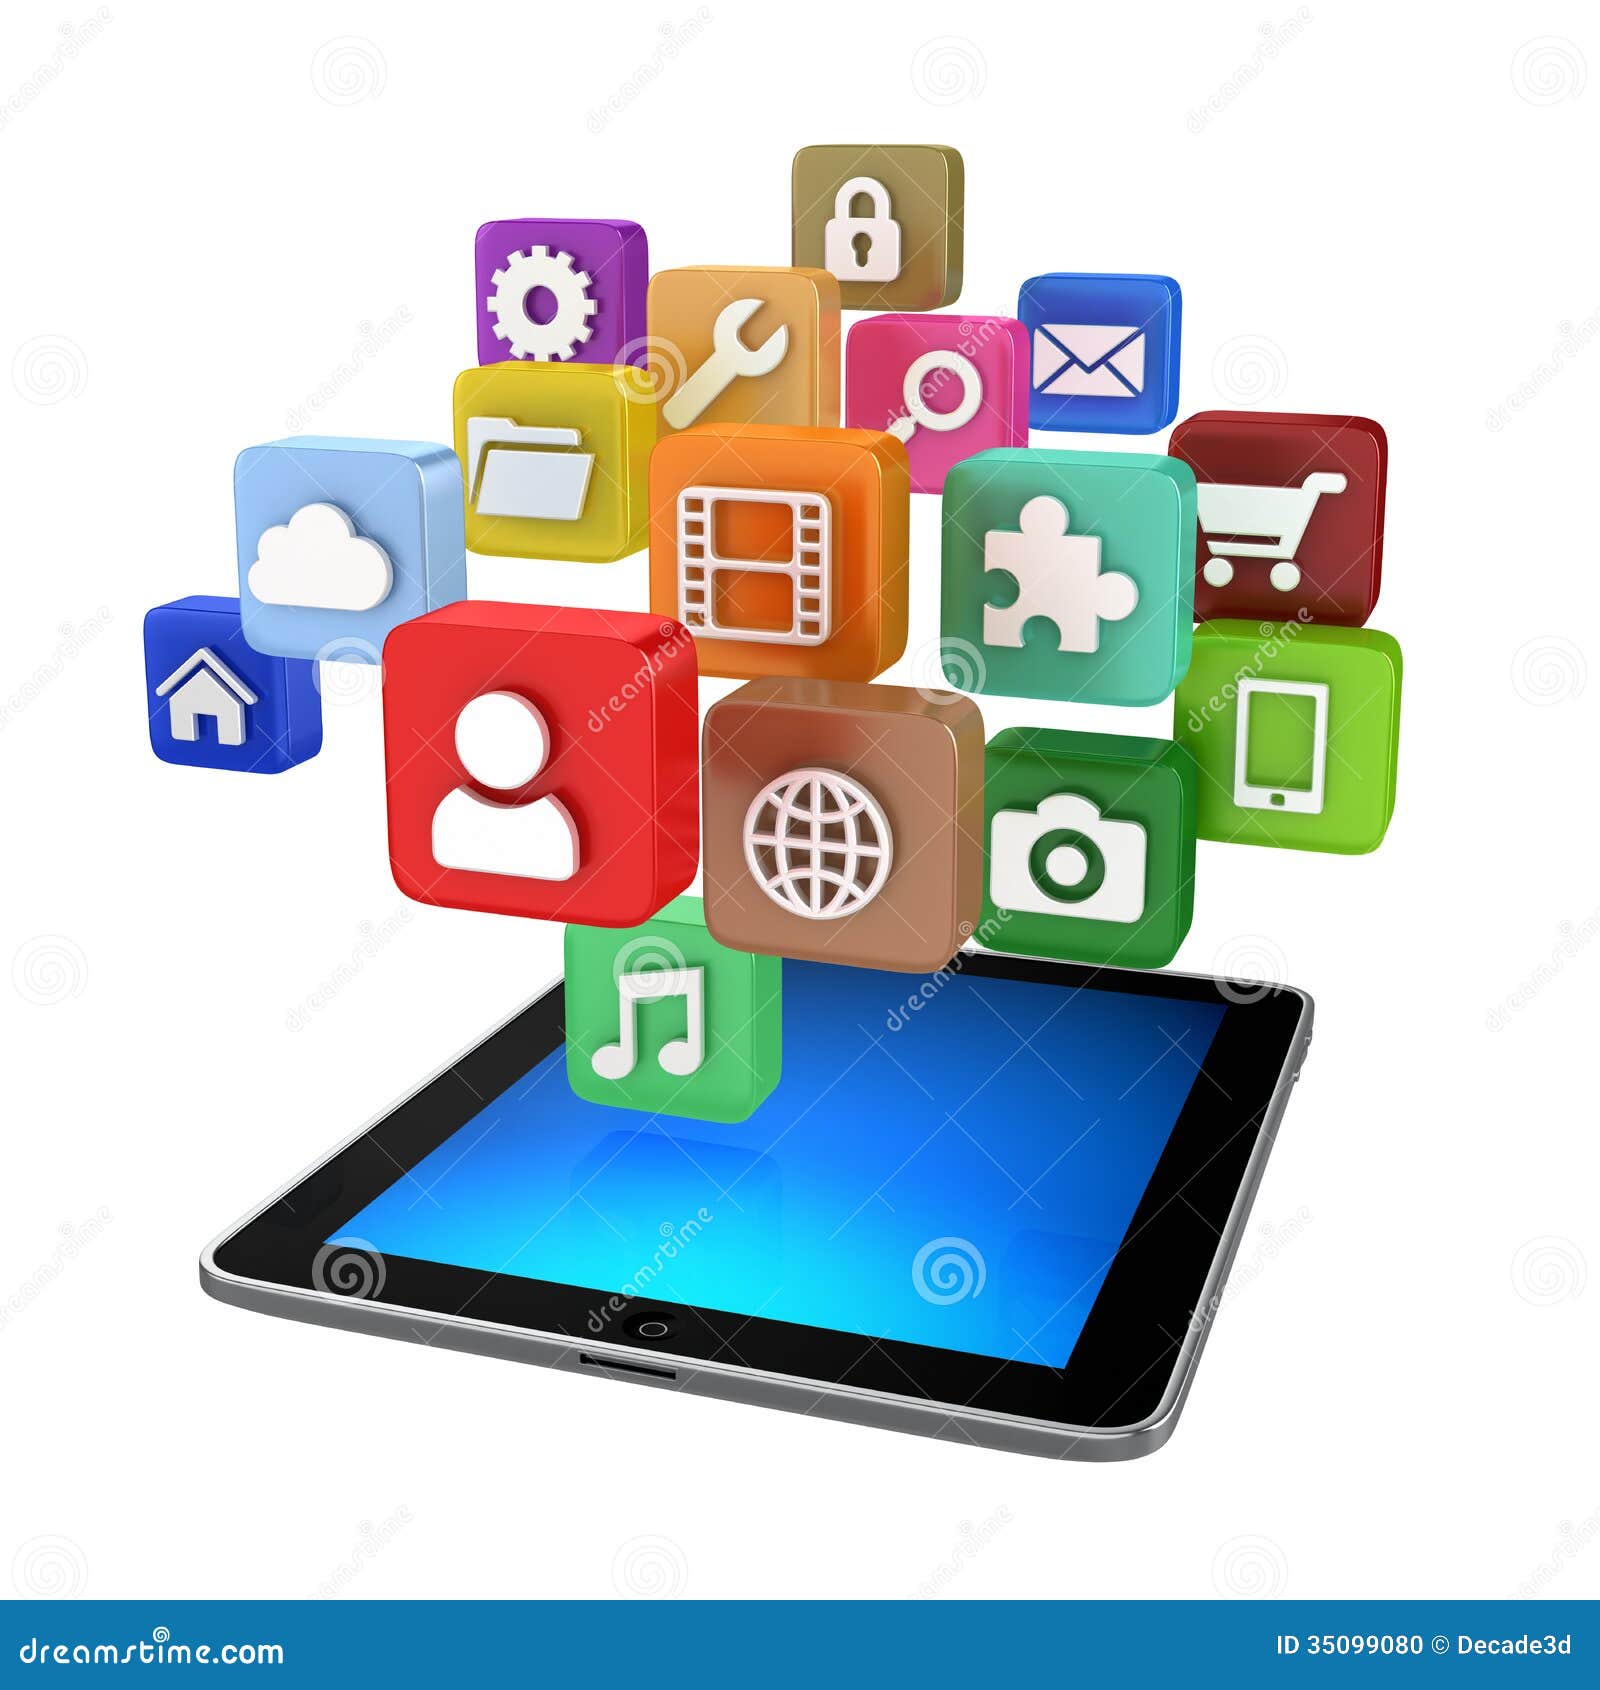 Tablet App Icons - Isolated Stock Photo - Image: 35099080